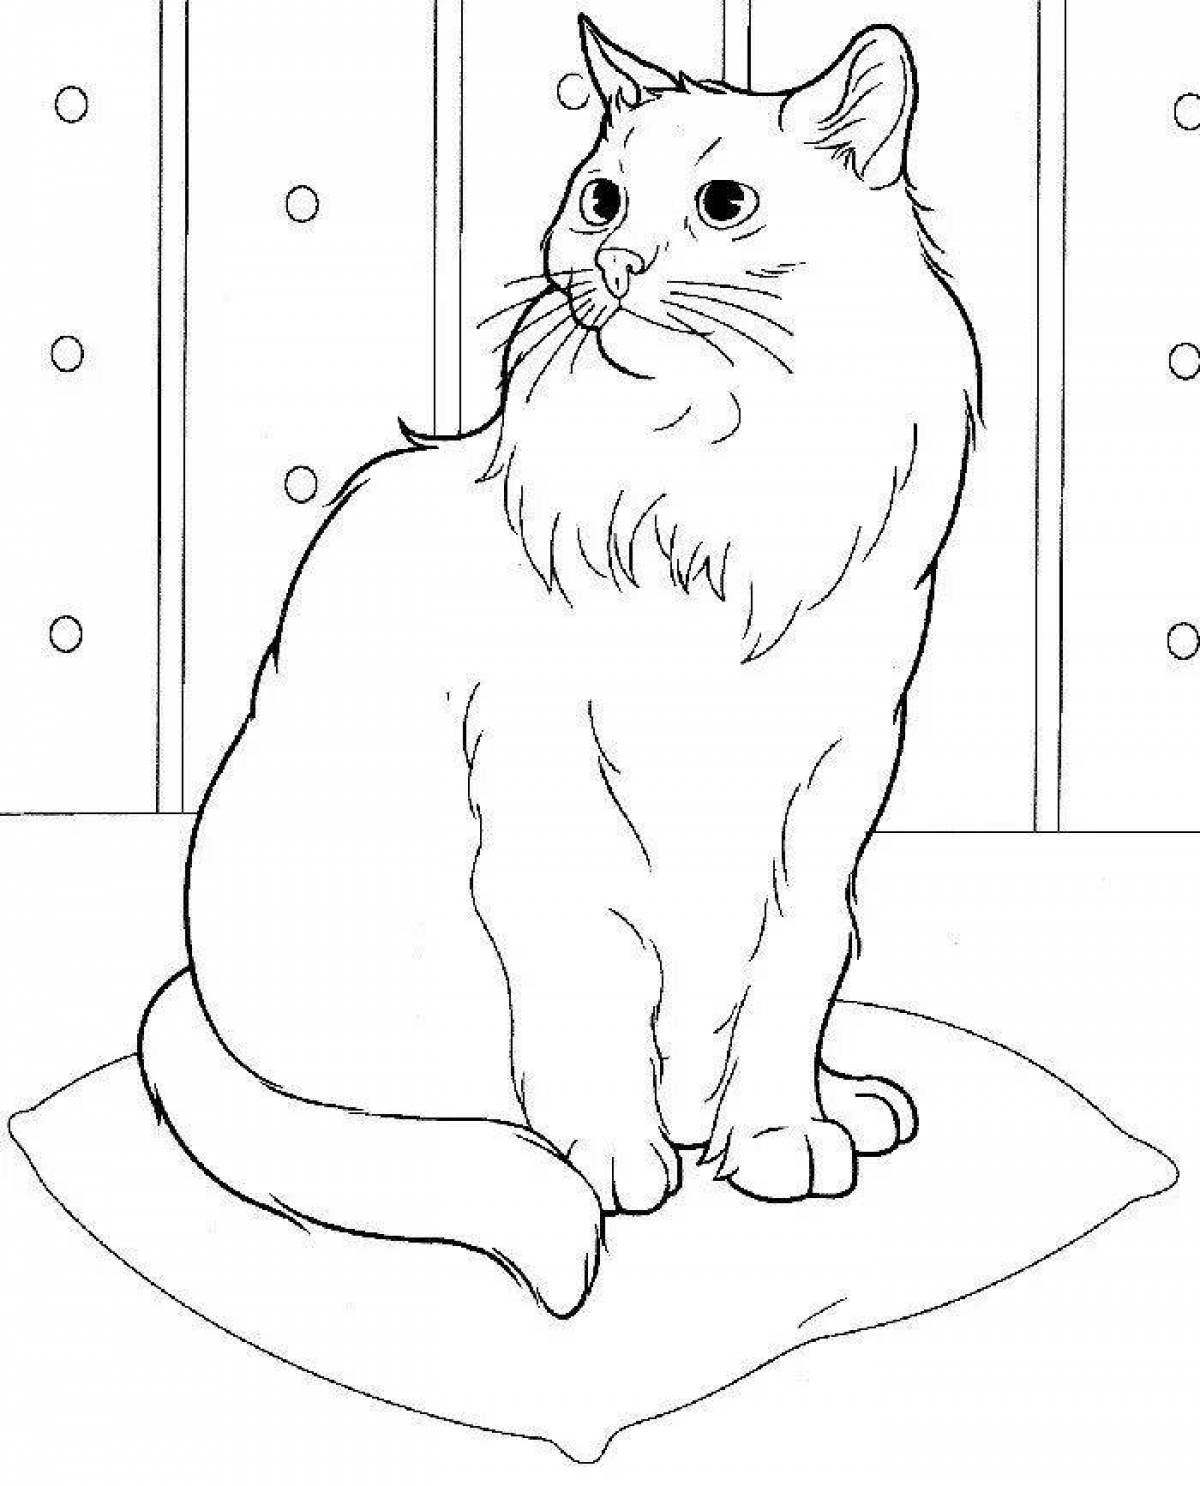 A witty drawing of a cat